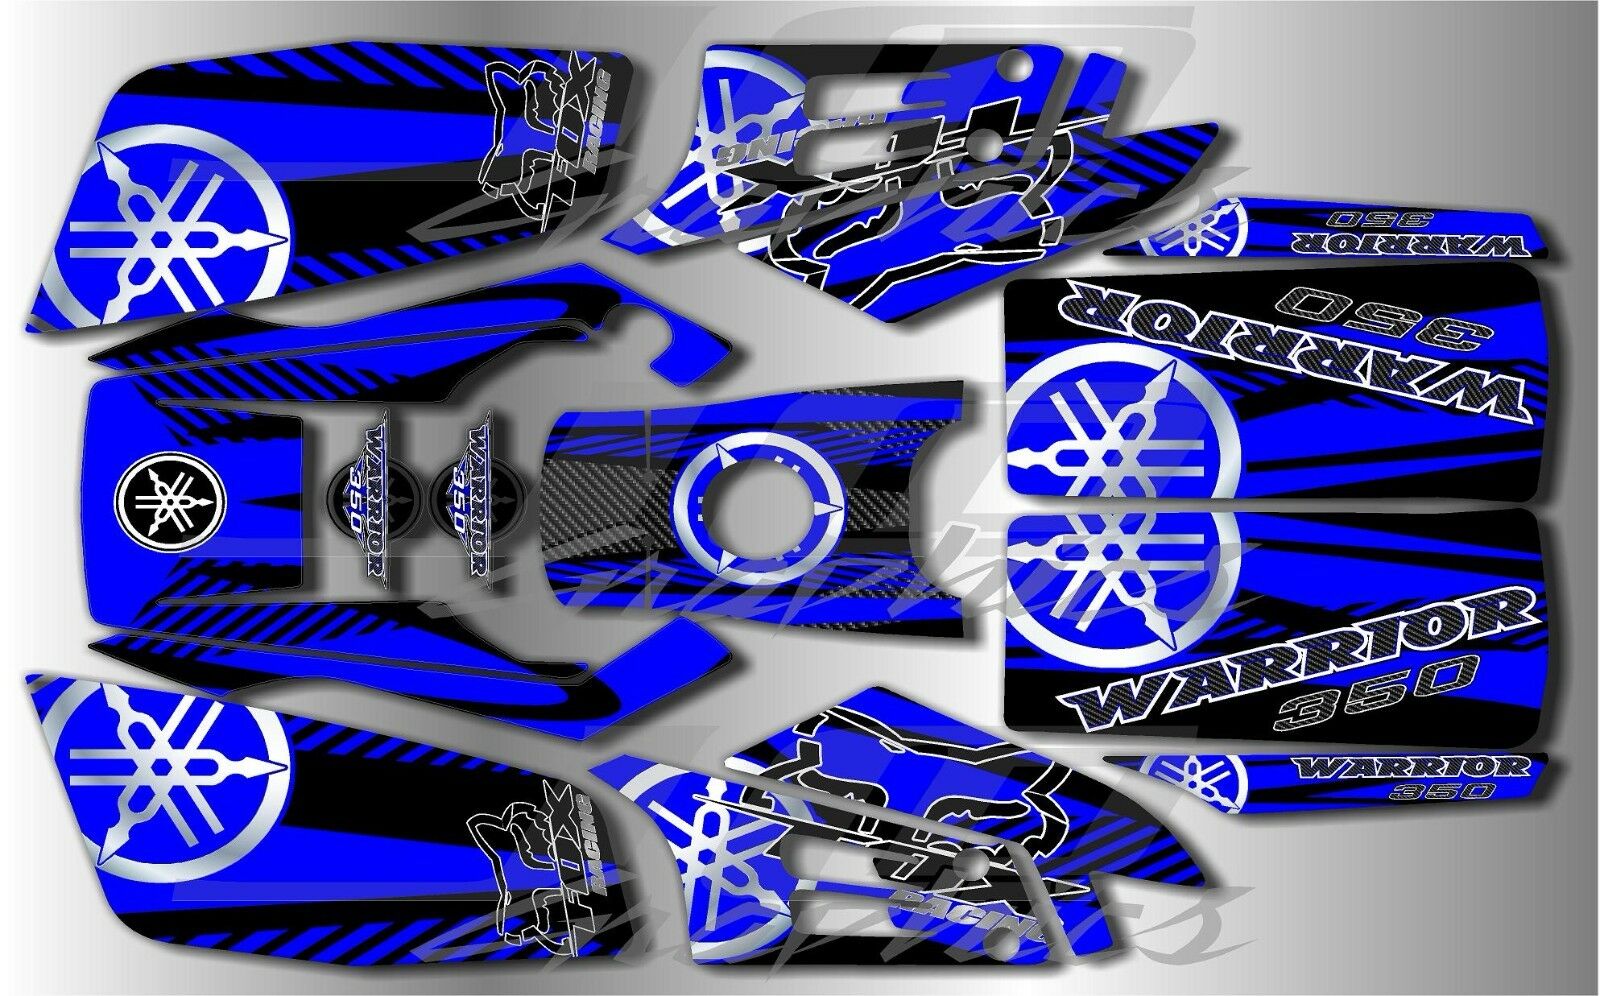 Yamaha Warrior Full Graphics Kit Decals Stickers ..thick And High Gloss